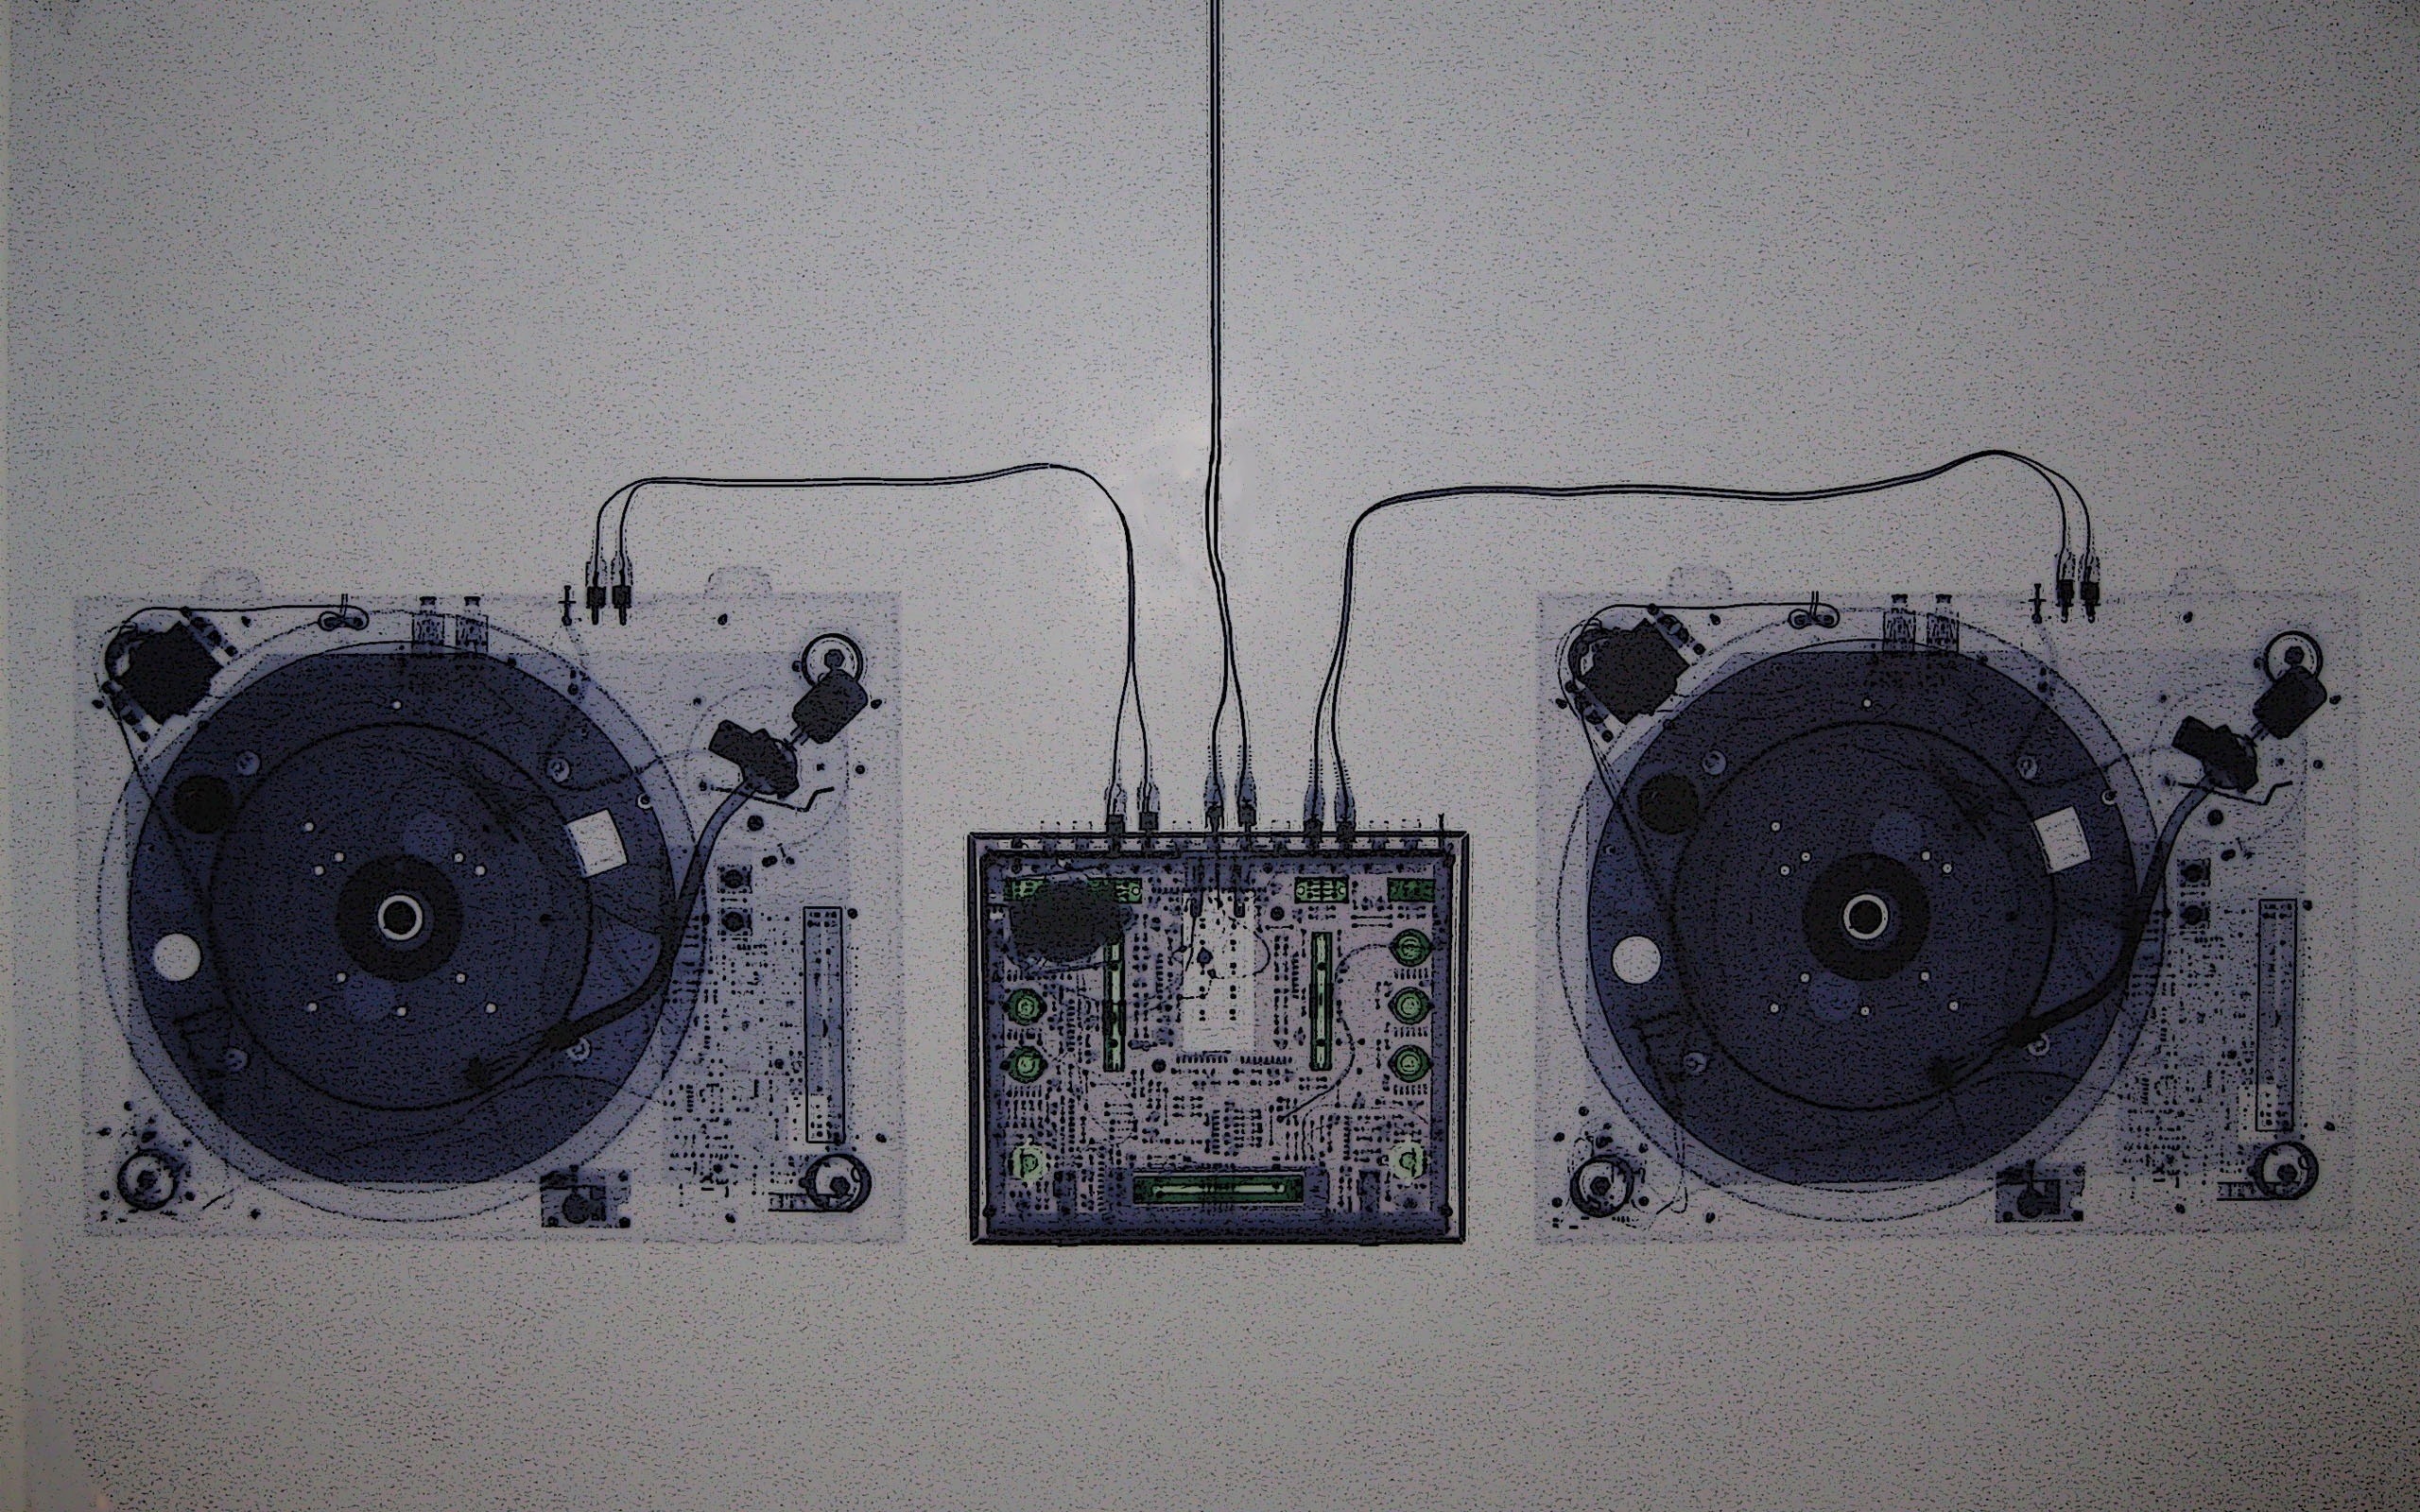 2560x1600 Technology turntables xray wallpaper